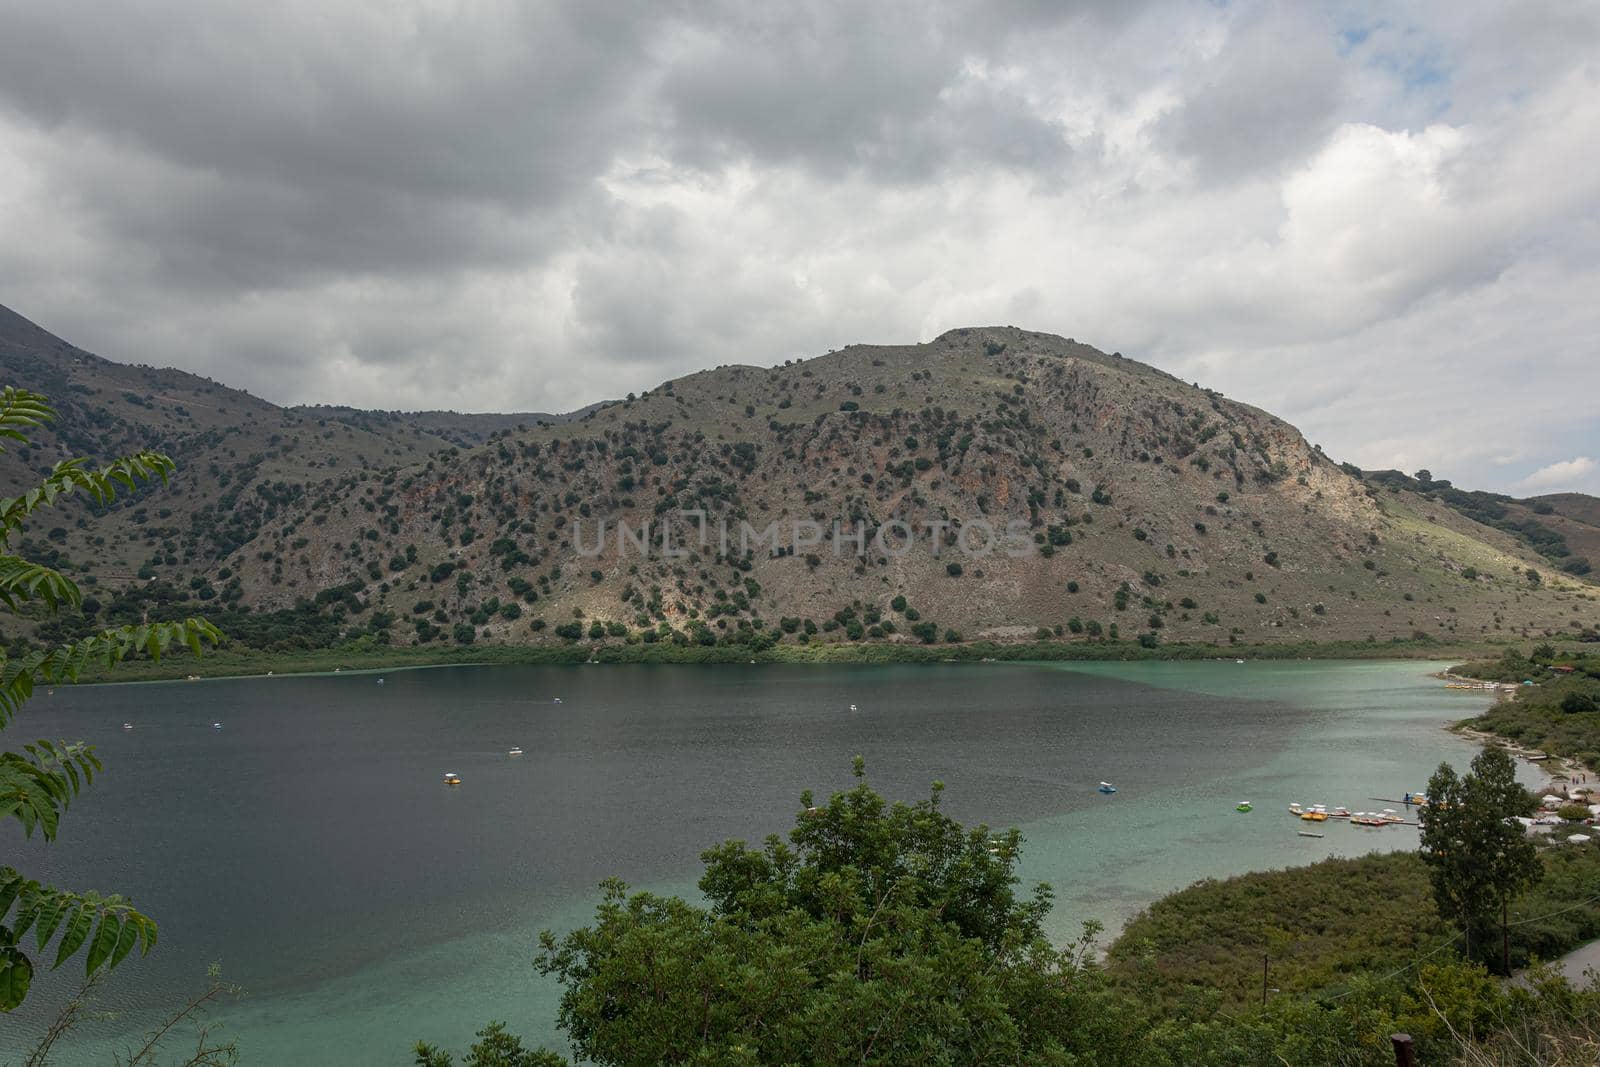 Lake Kurnas in the highlands. Cloudy weather (Greece, Crete) by Grommik